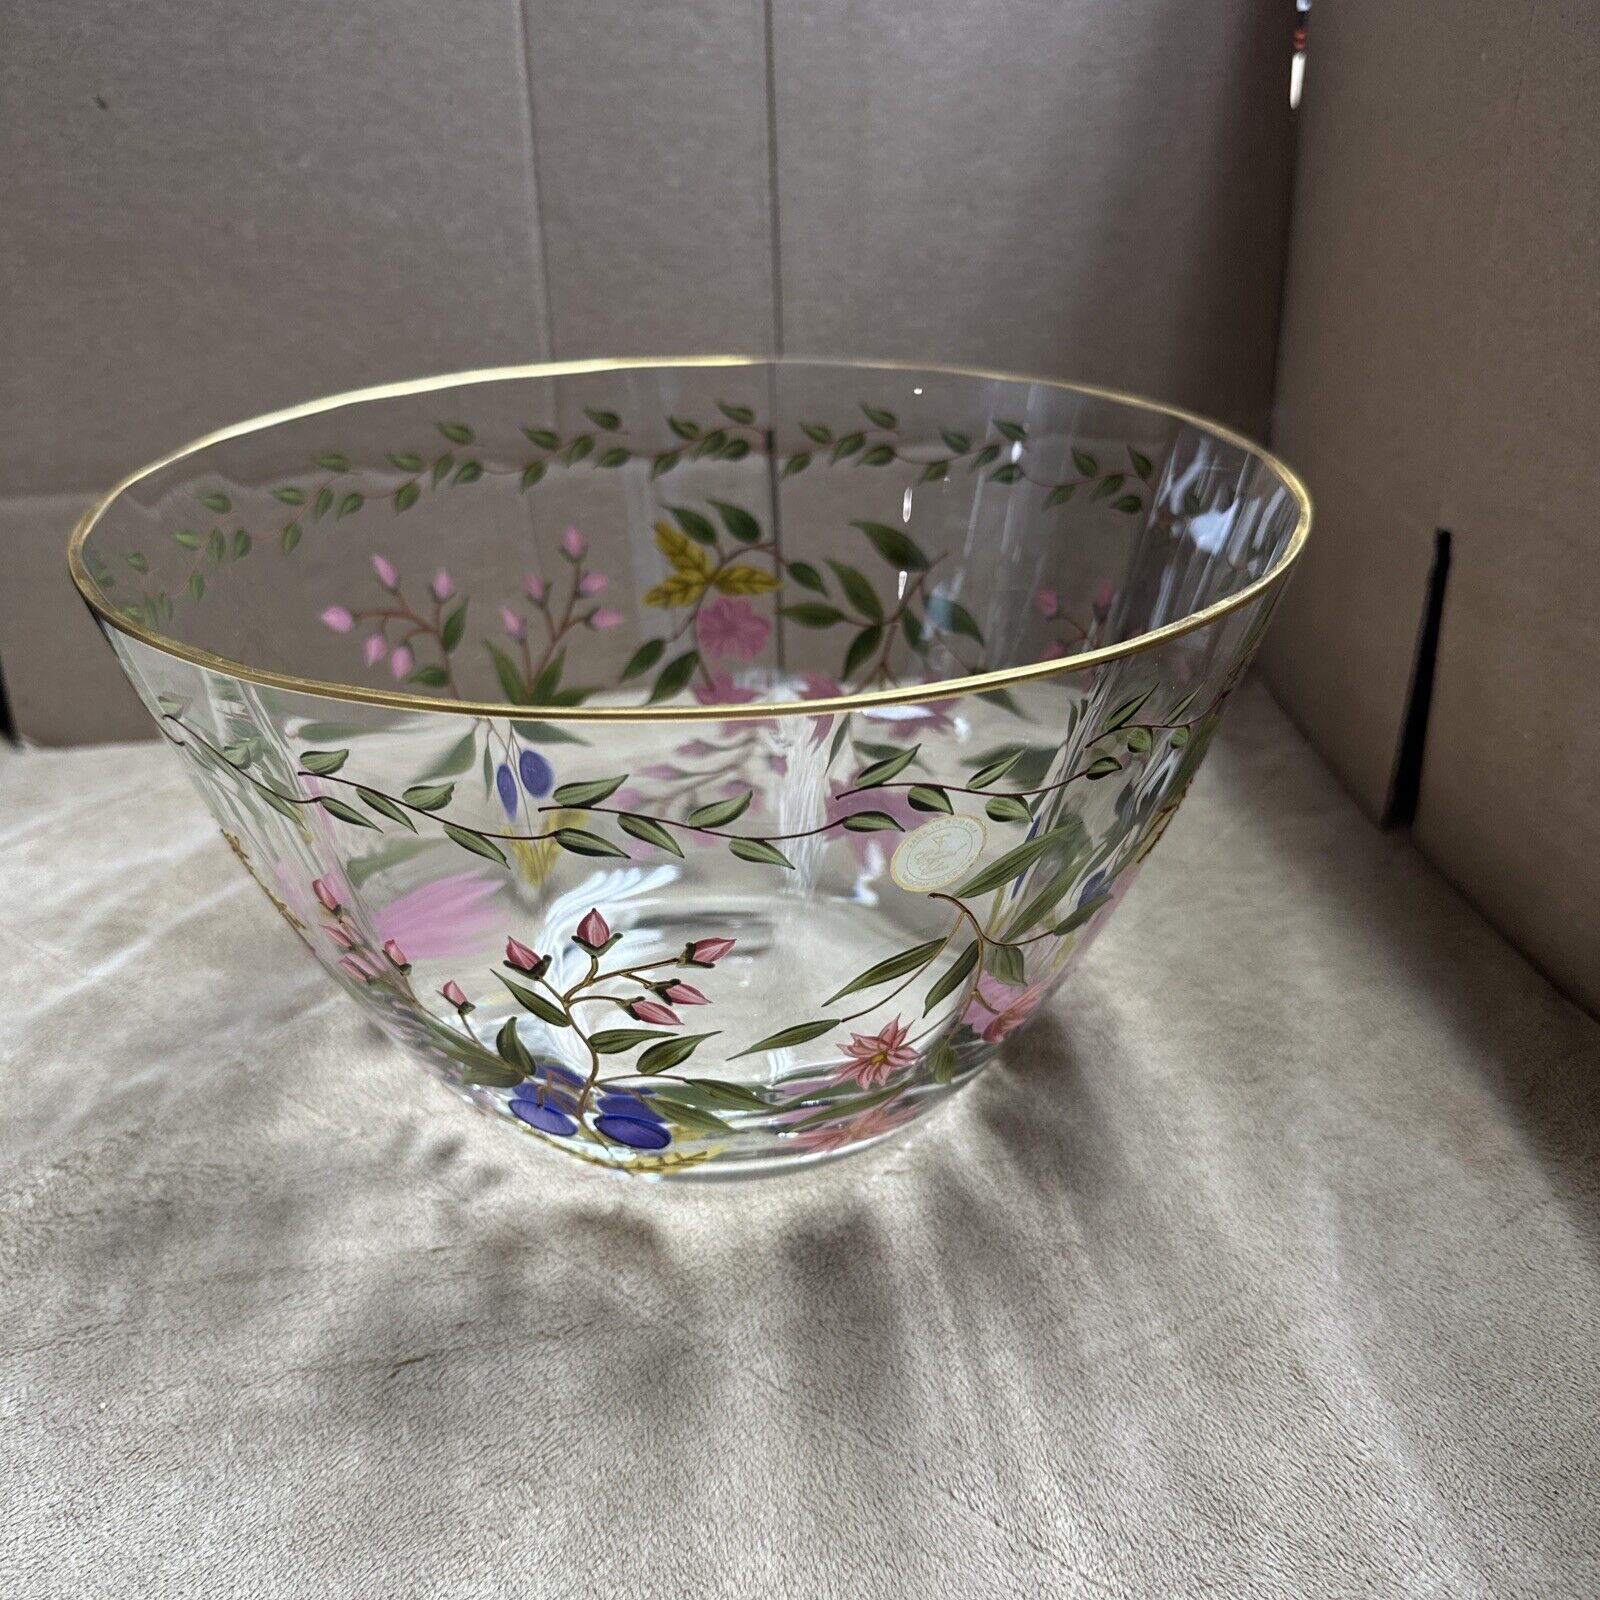 Large Vintage 11” Hand painted In Romania Fruit/Salad Bowl